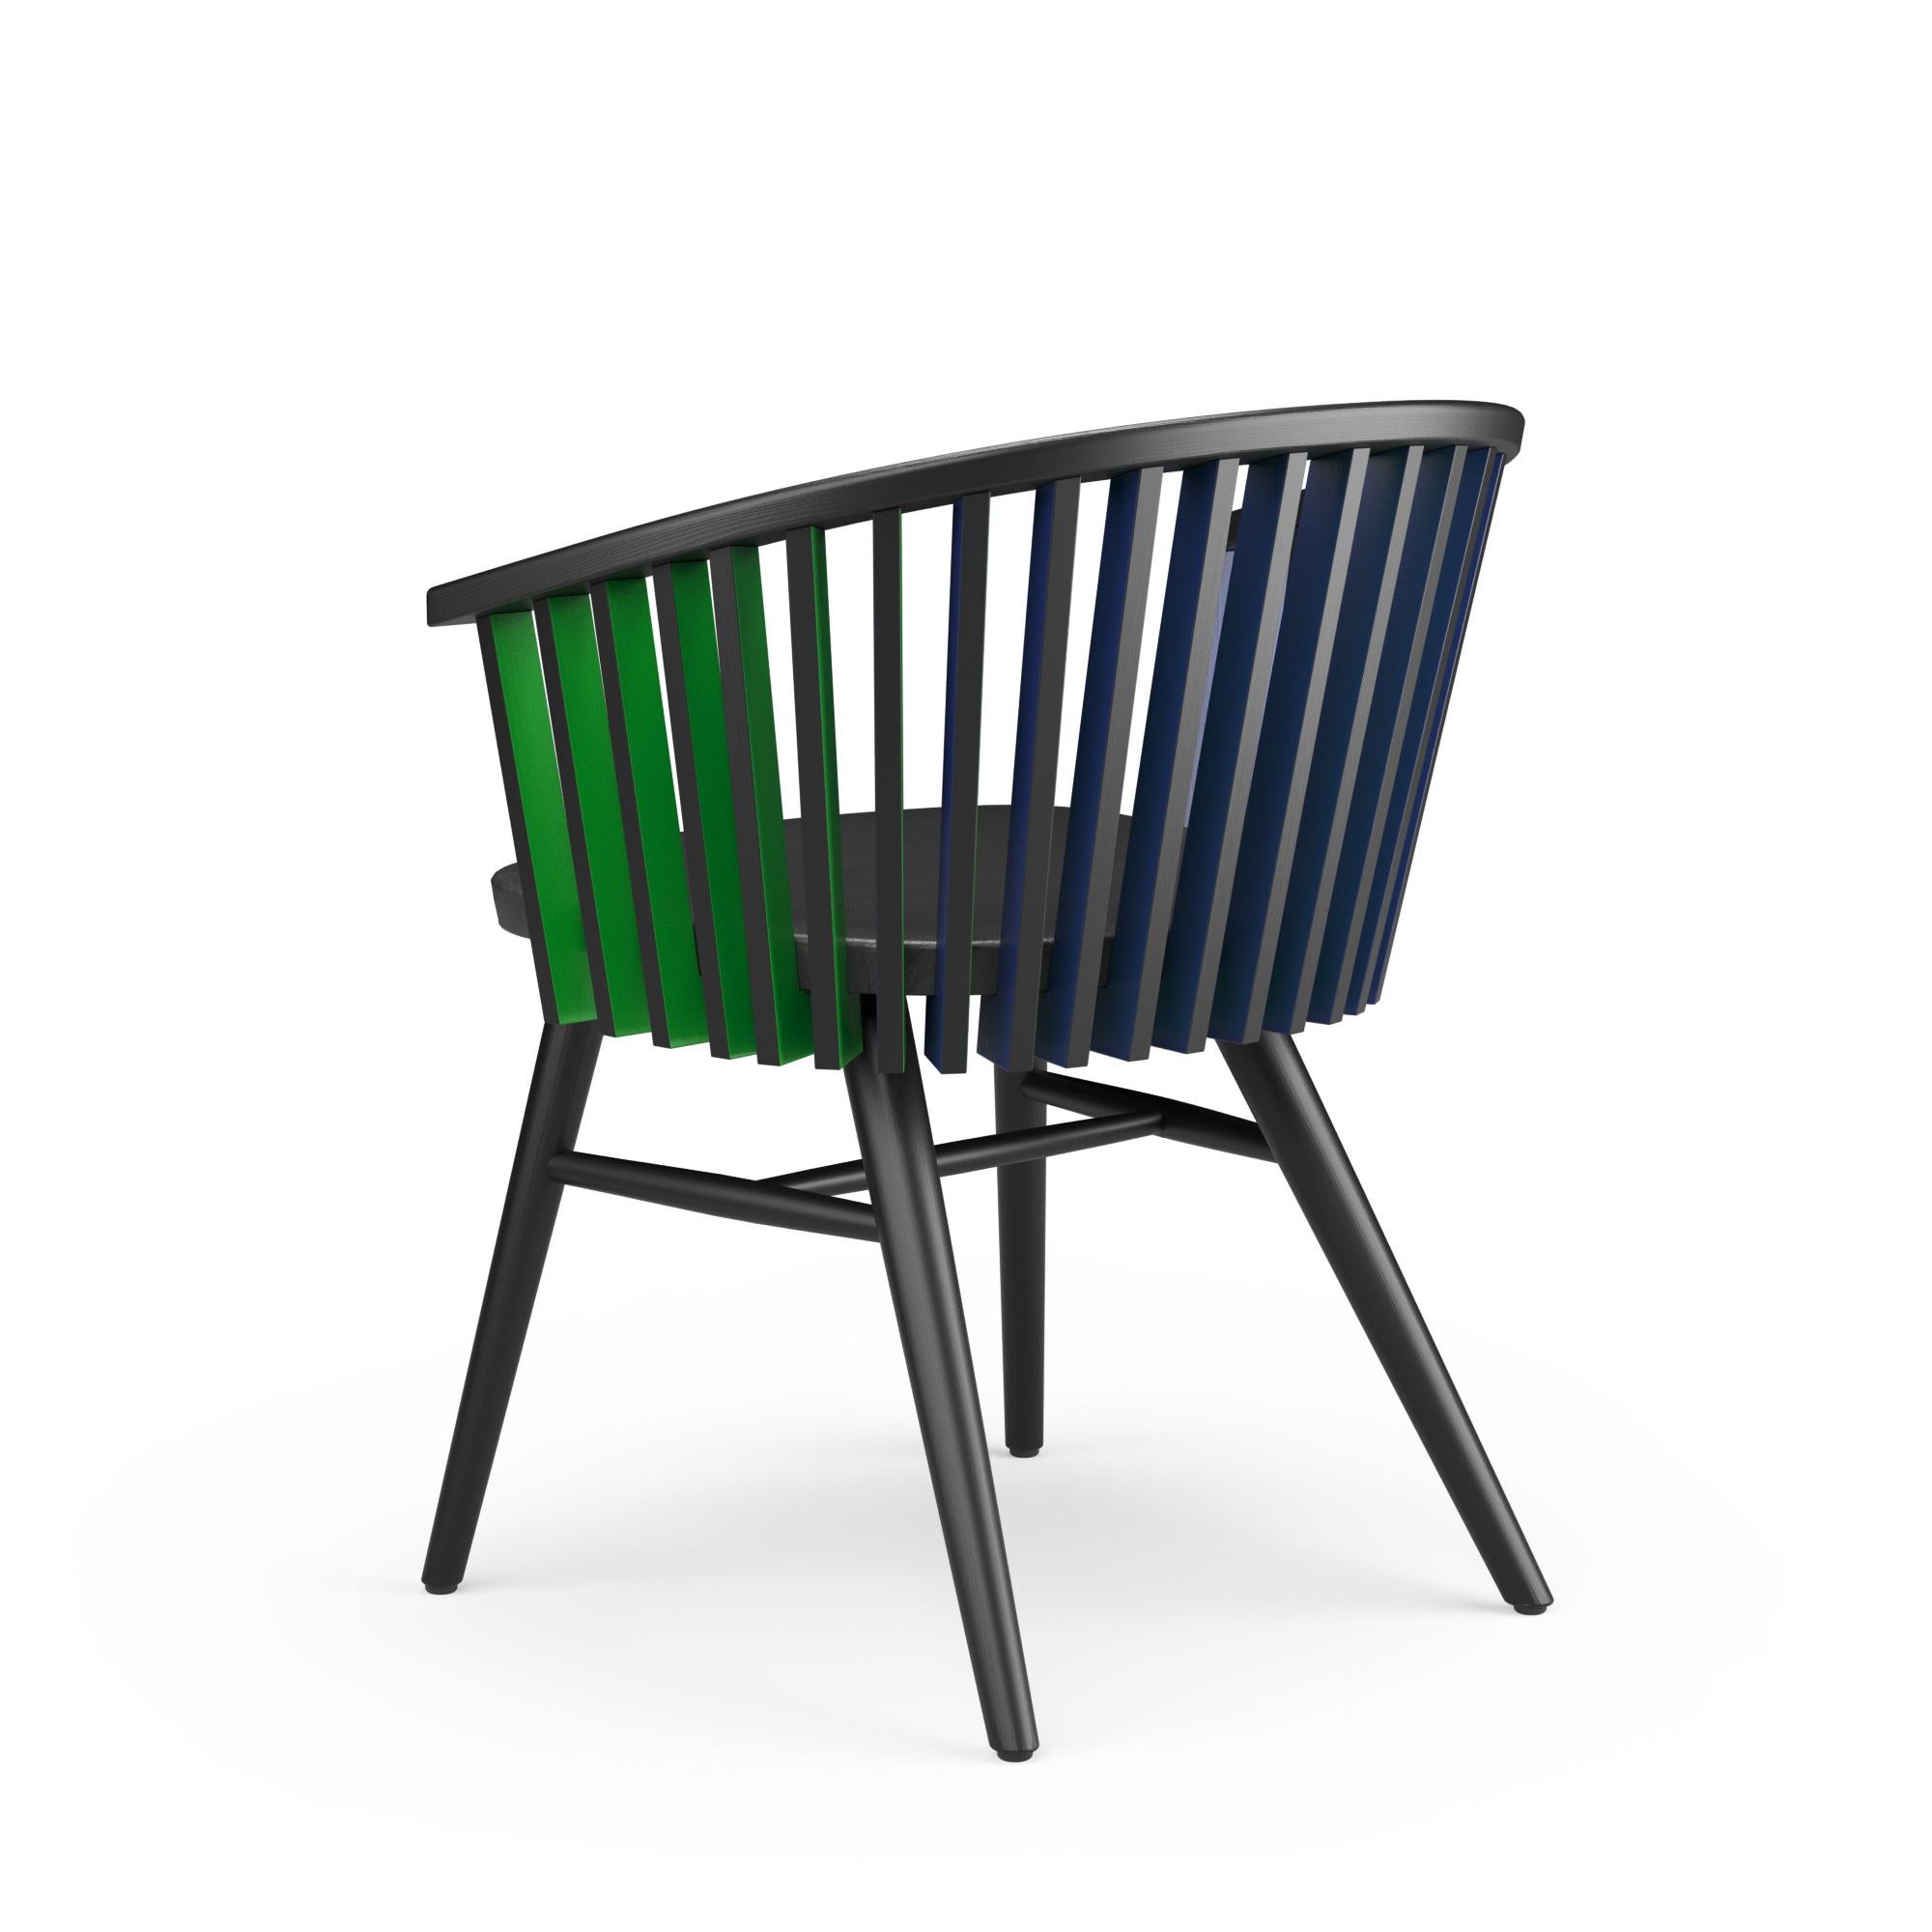 Modern Hayche, Tornasol Rounded chair, Bla, Green & Blue, Solid Wood, UK, Made To Order For Sale